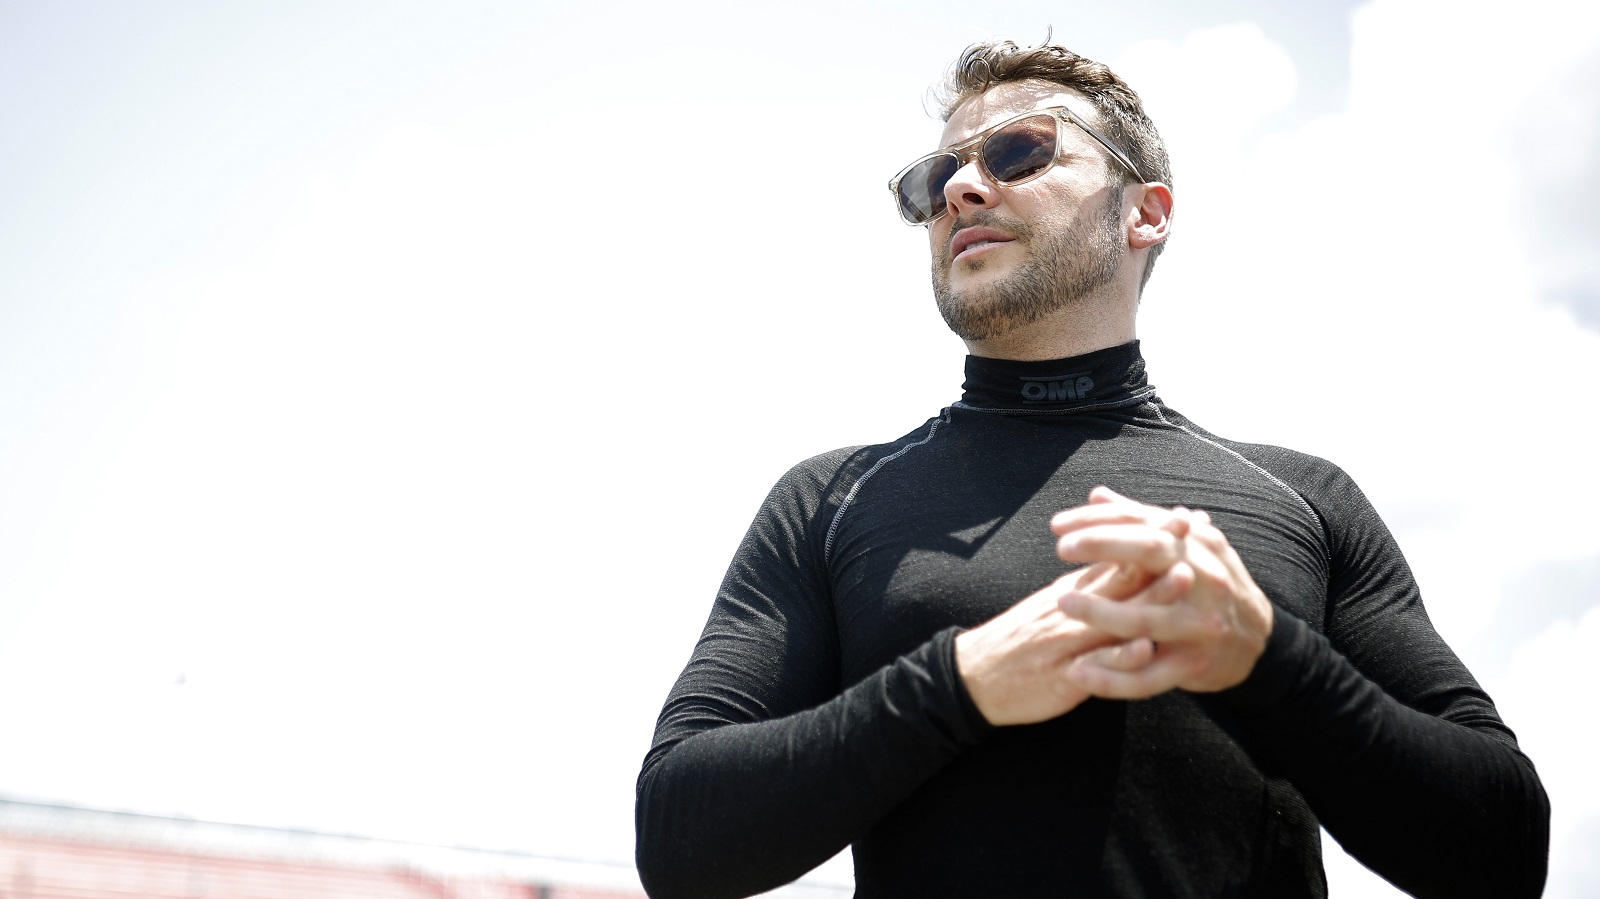 Marco Andretti stands on the grid during practice for the Camping World Superstar Racing Experience event at South Boston Speedway on June 25, 2022 in South Boston, Virginia. | Jared Tilton/SRX/Getty Images